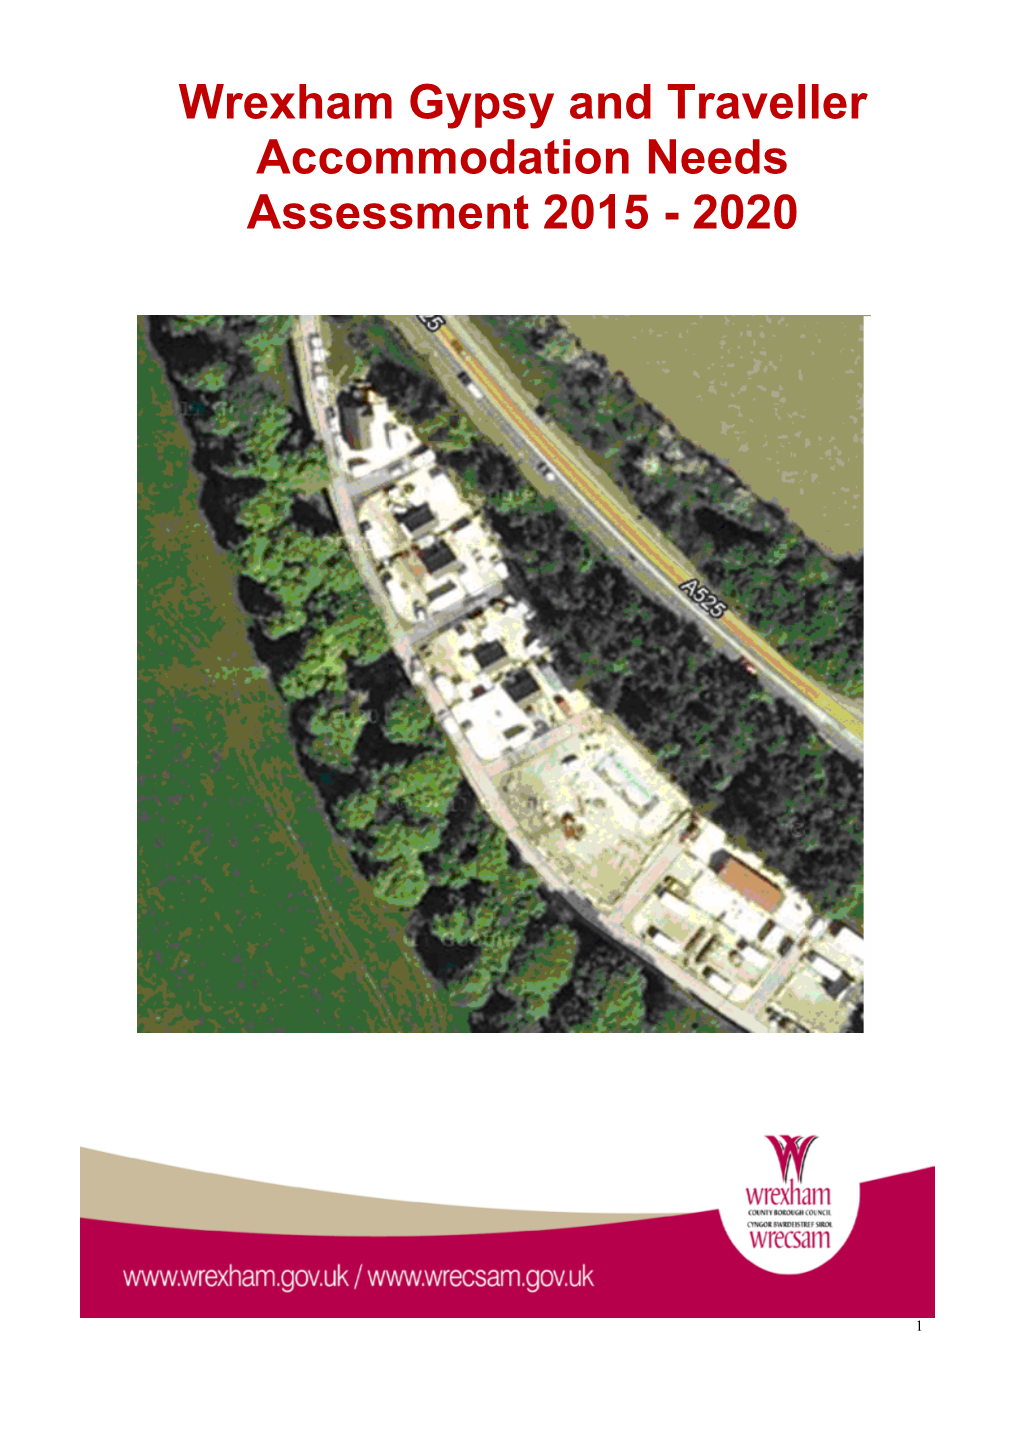 Wrexham Gypsy and Traveller Accommodation Needs Assessment 2015 - 2020